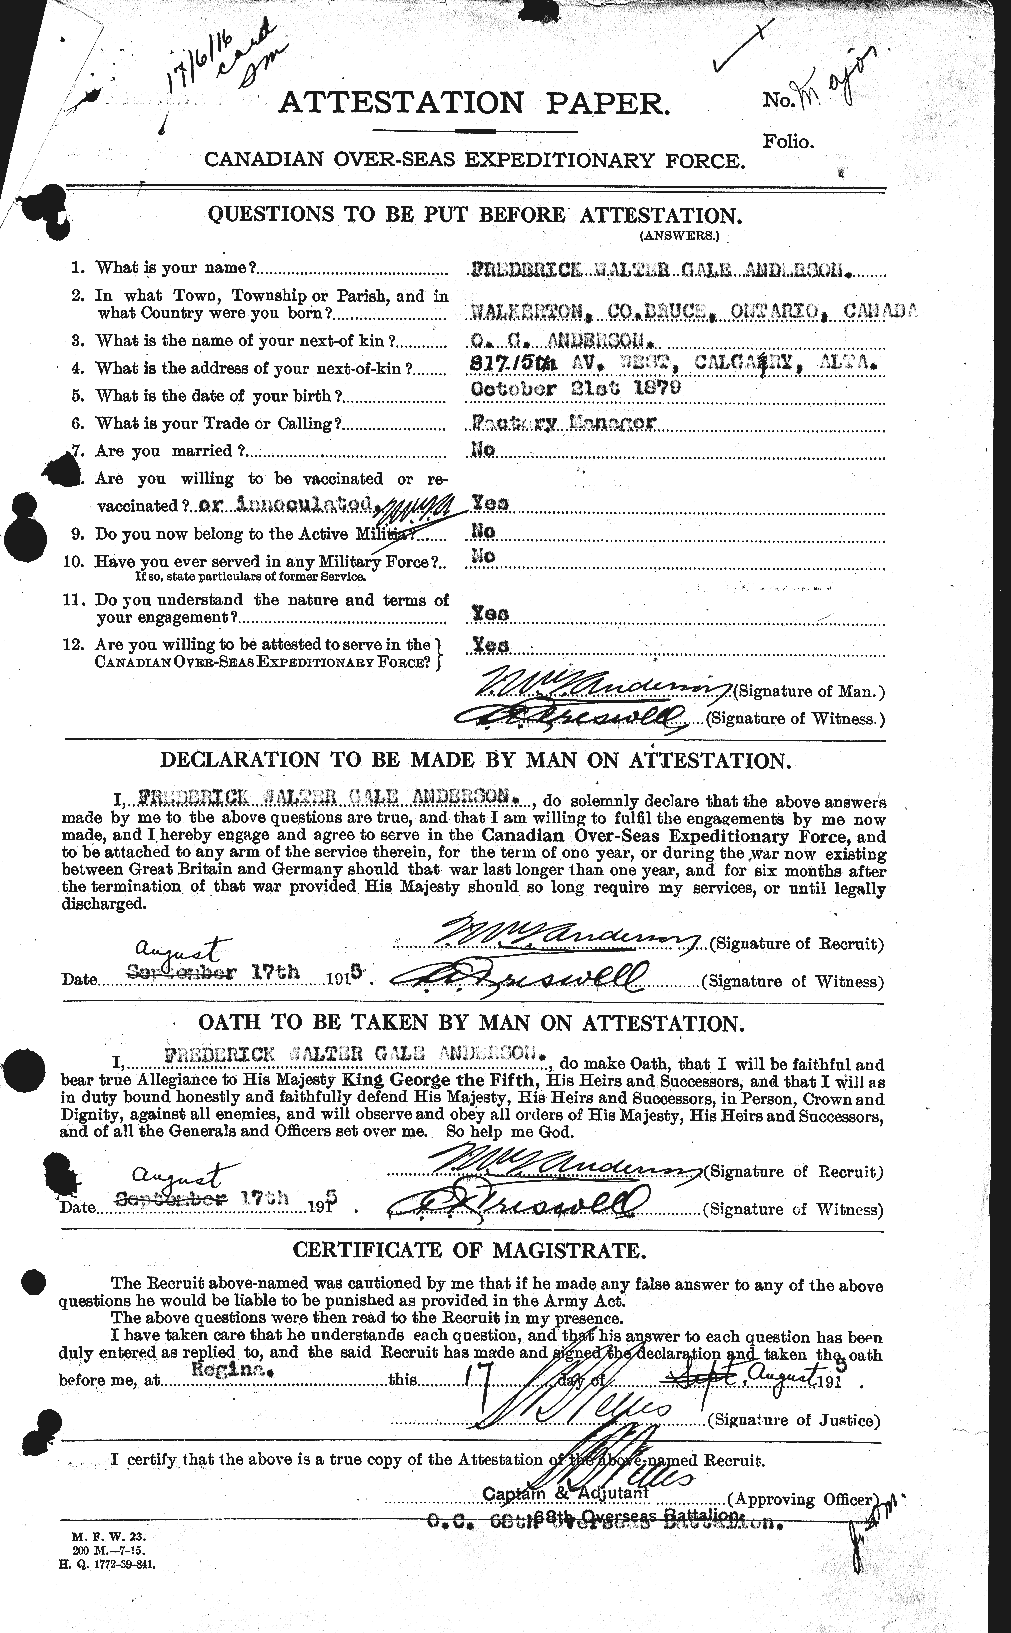 Personnel Records of the First World War - CEF 209806a